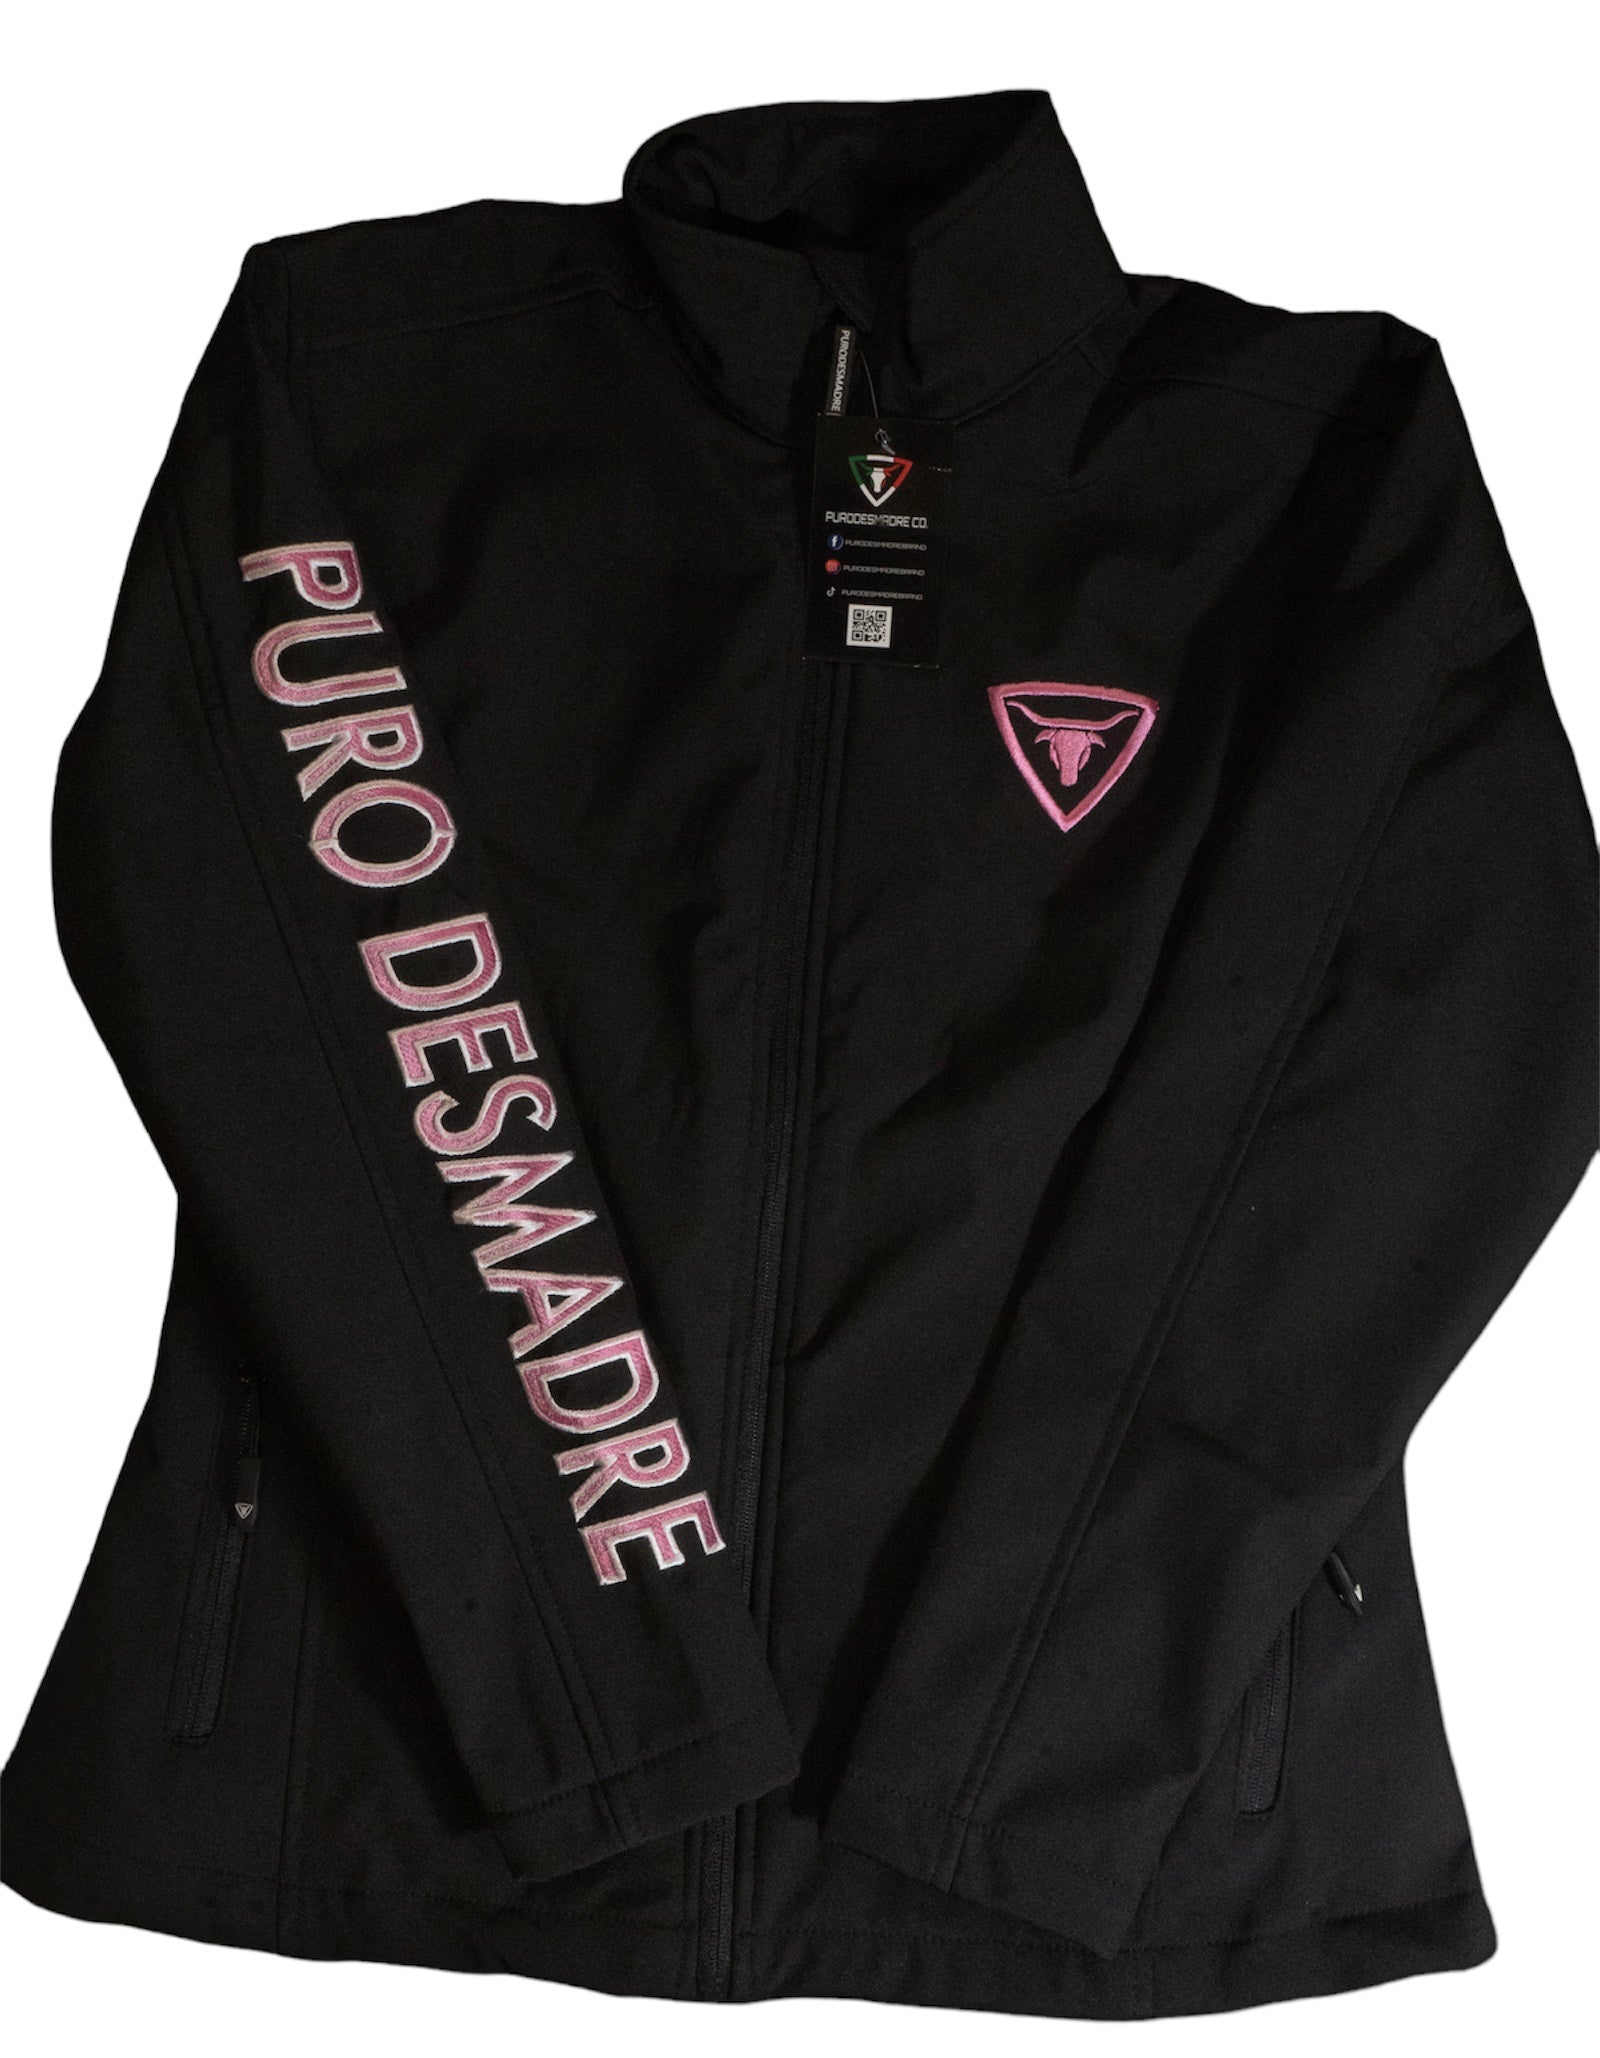 Puro Desmadre Project Pink Jacket Sleeve Embroidery